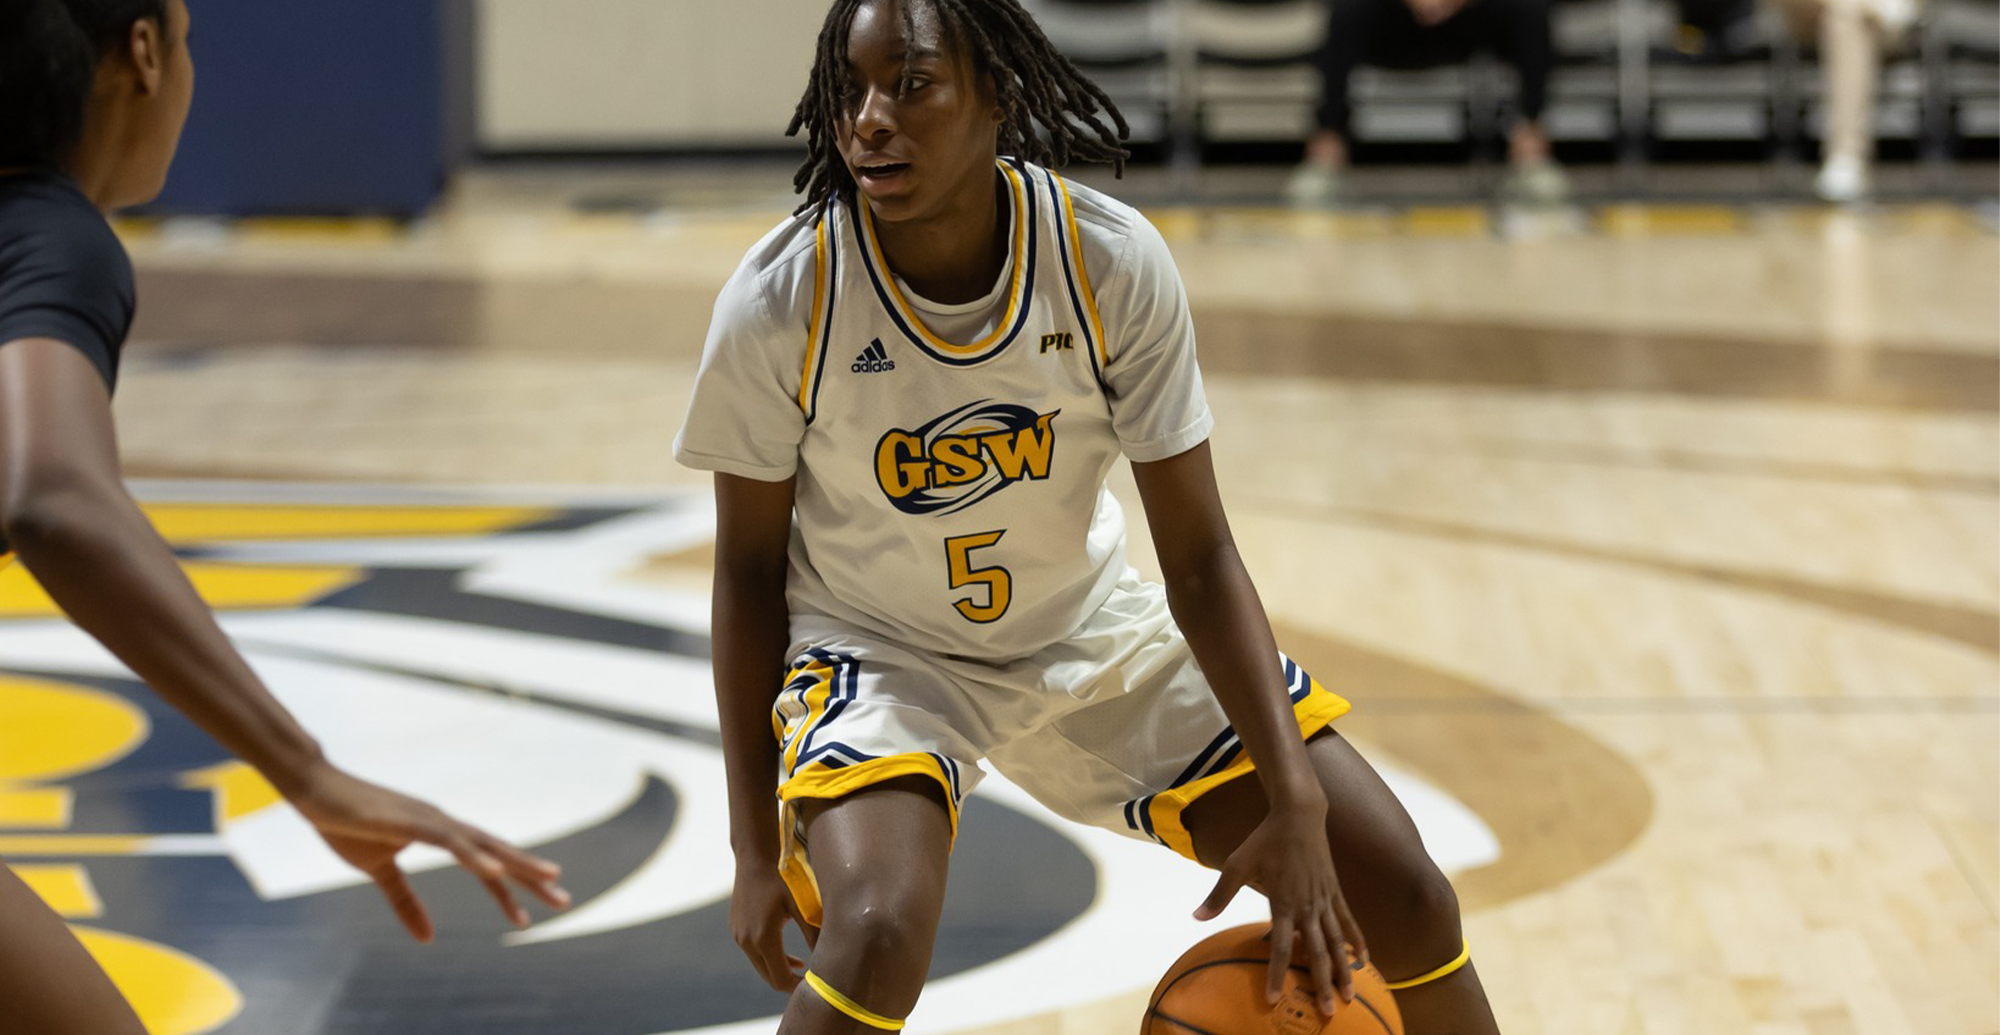 Lady Canes Fall To Lander In Overtime Thriller 74-70